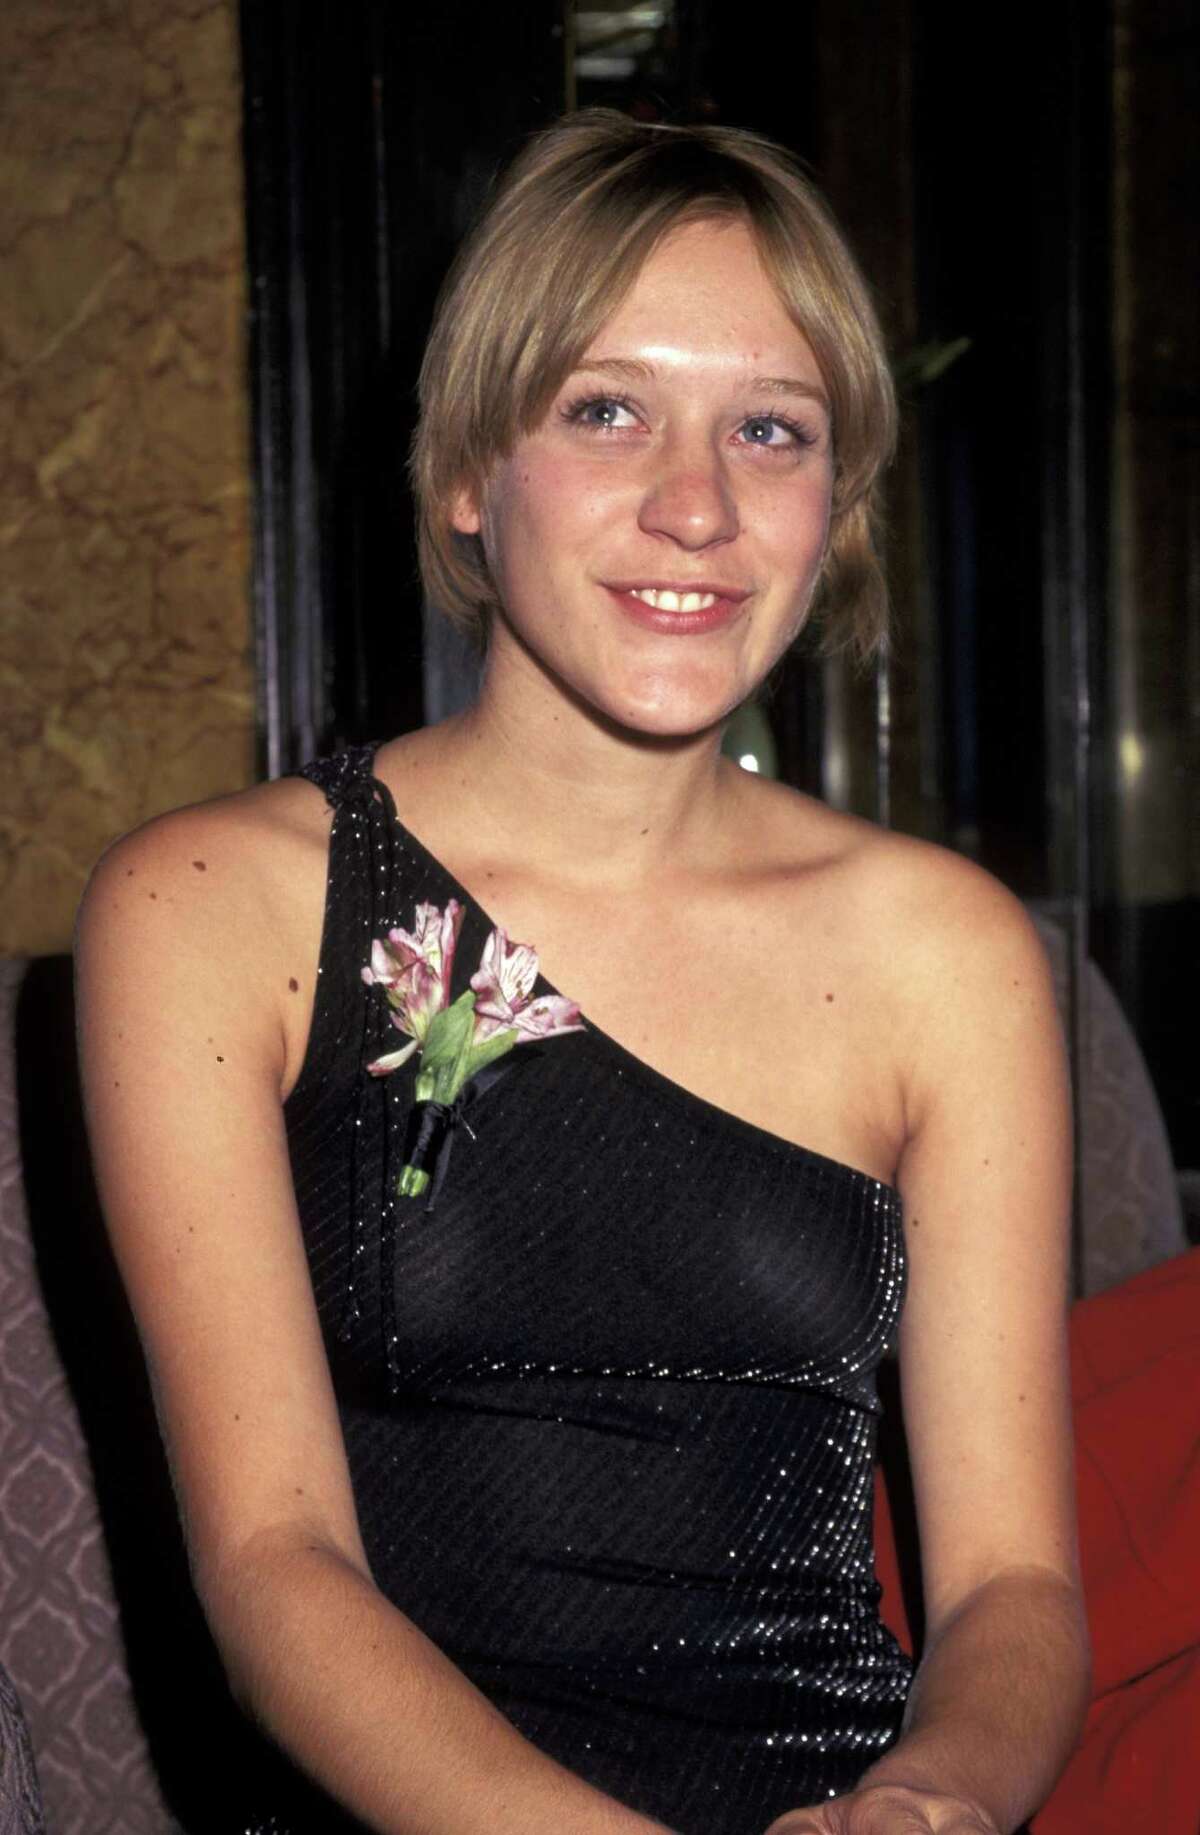 Chloe Sevigny, whose birthday is Nov. 18, 1974, is the latest star to turn 40. She's in good company. Take a look at the other celebs who have or will hit this milestone birthday this year. (Photo: 1996)